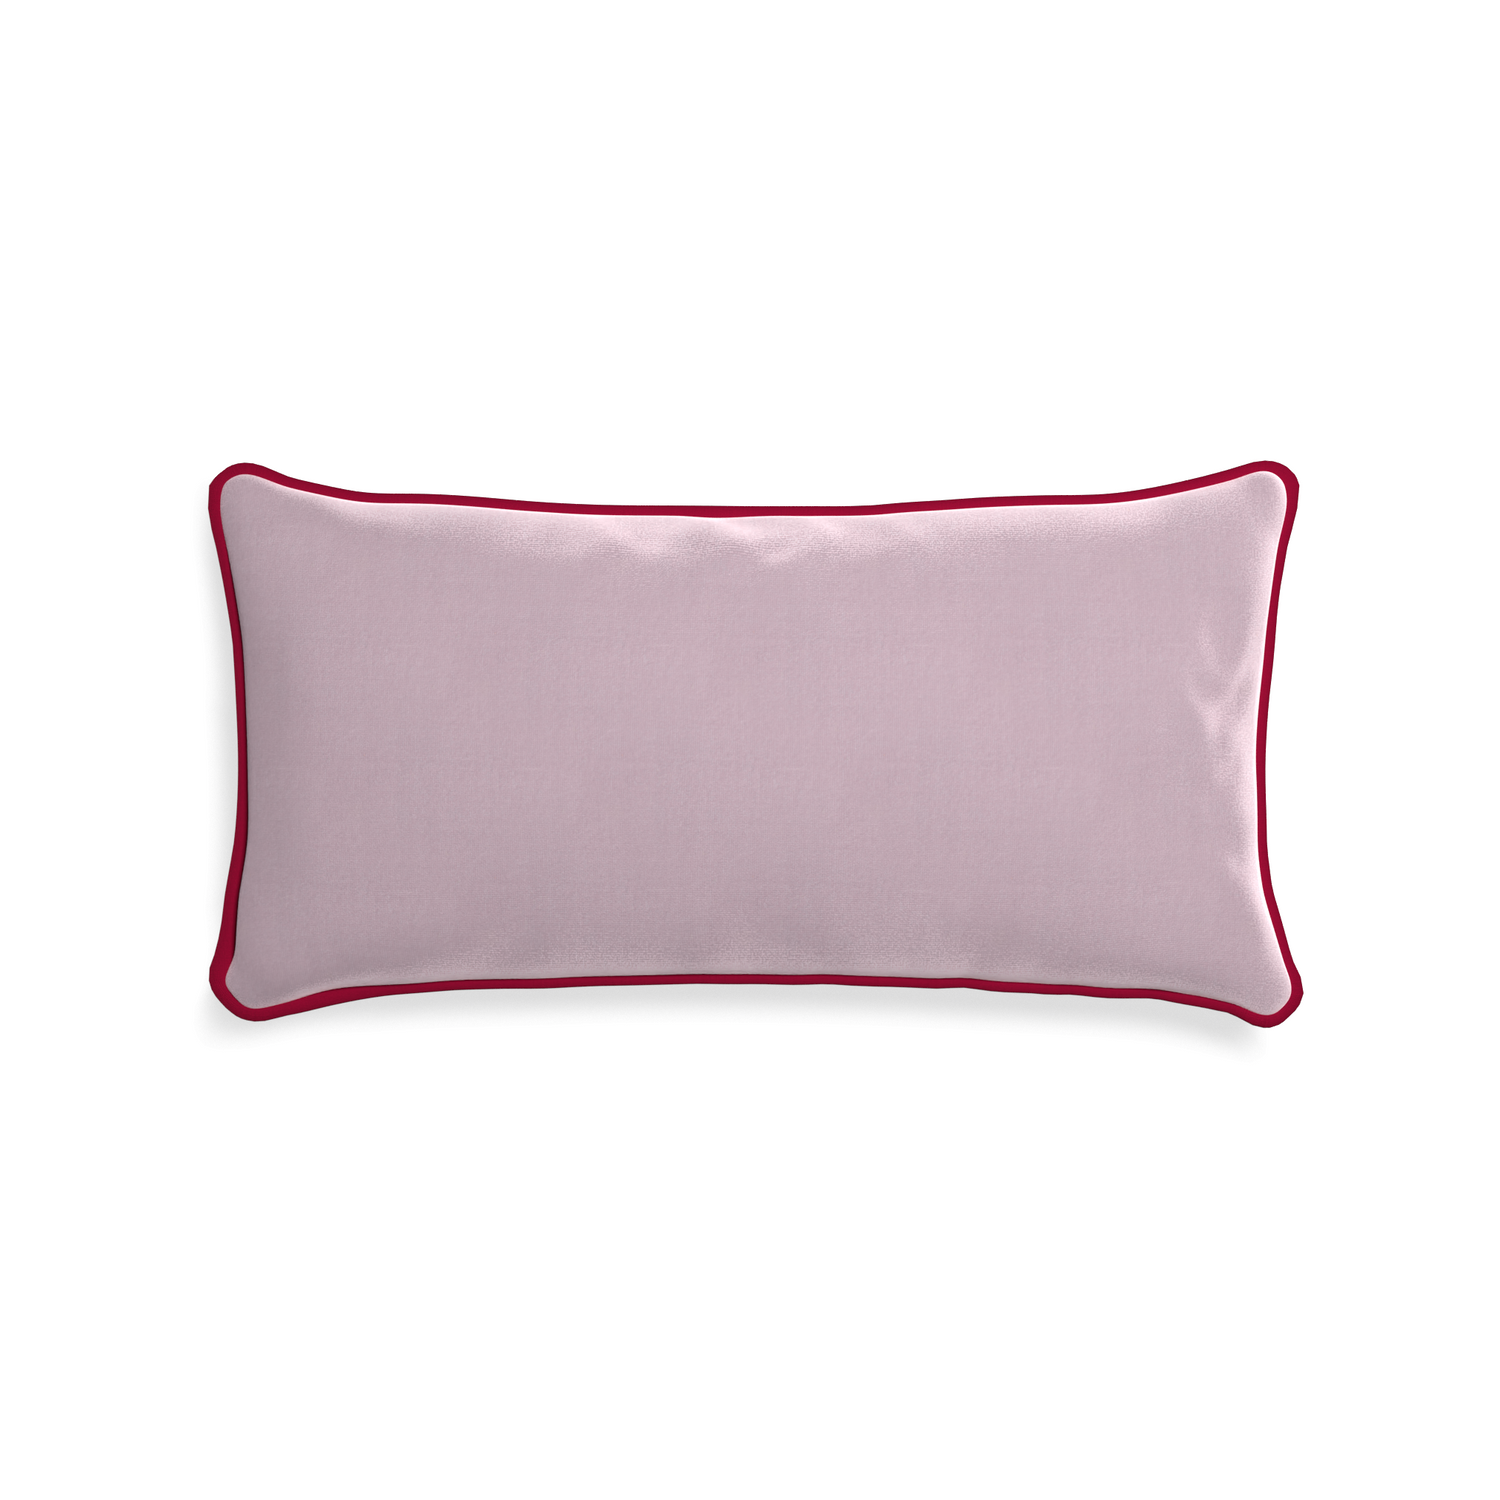 Midi-lumbar lilac velvet custom lilacpillow with raspberry piping on white background